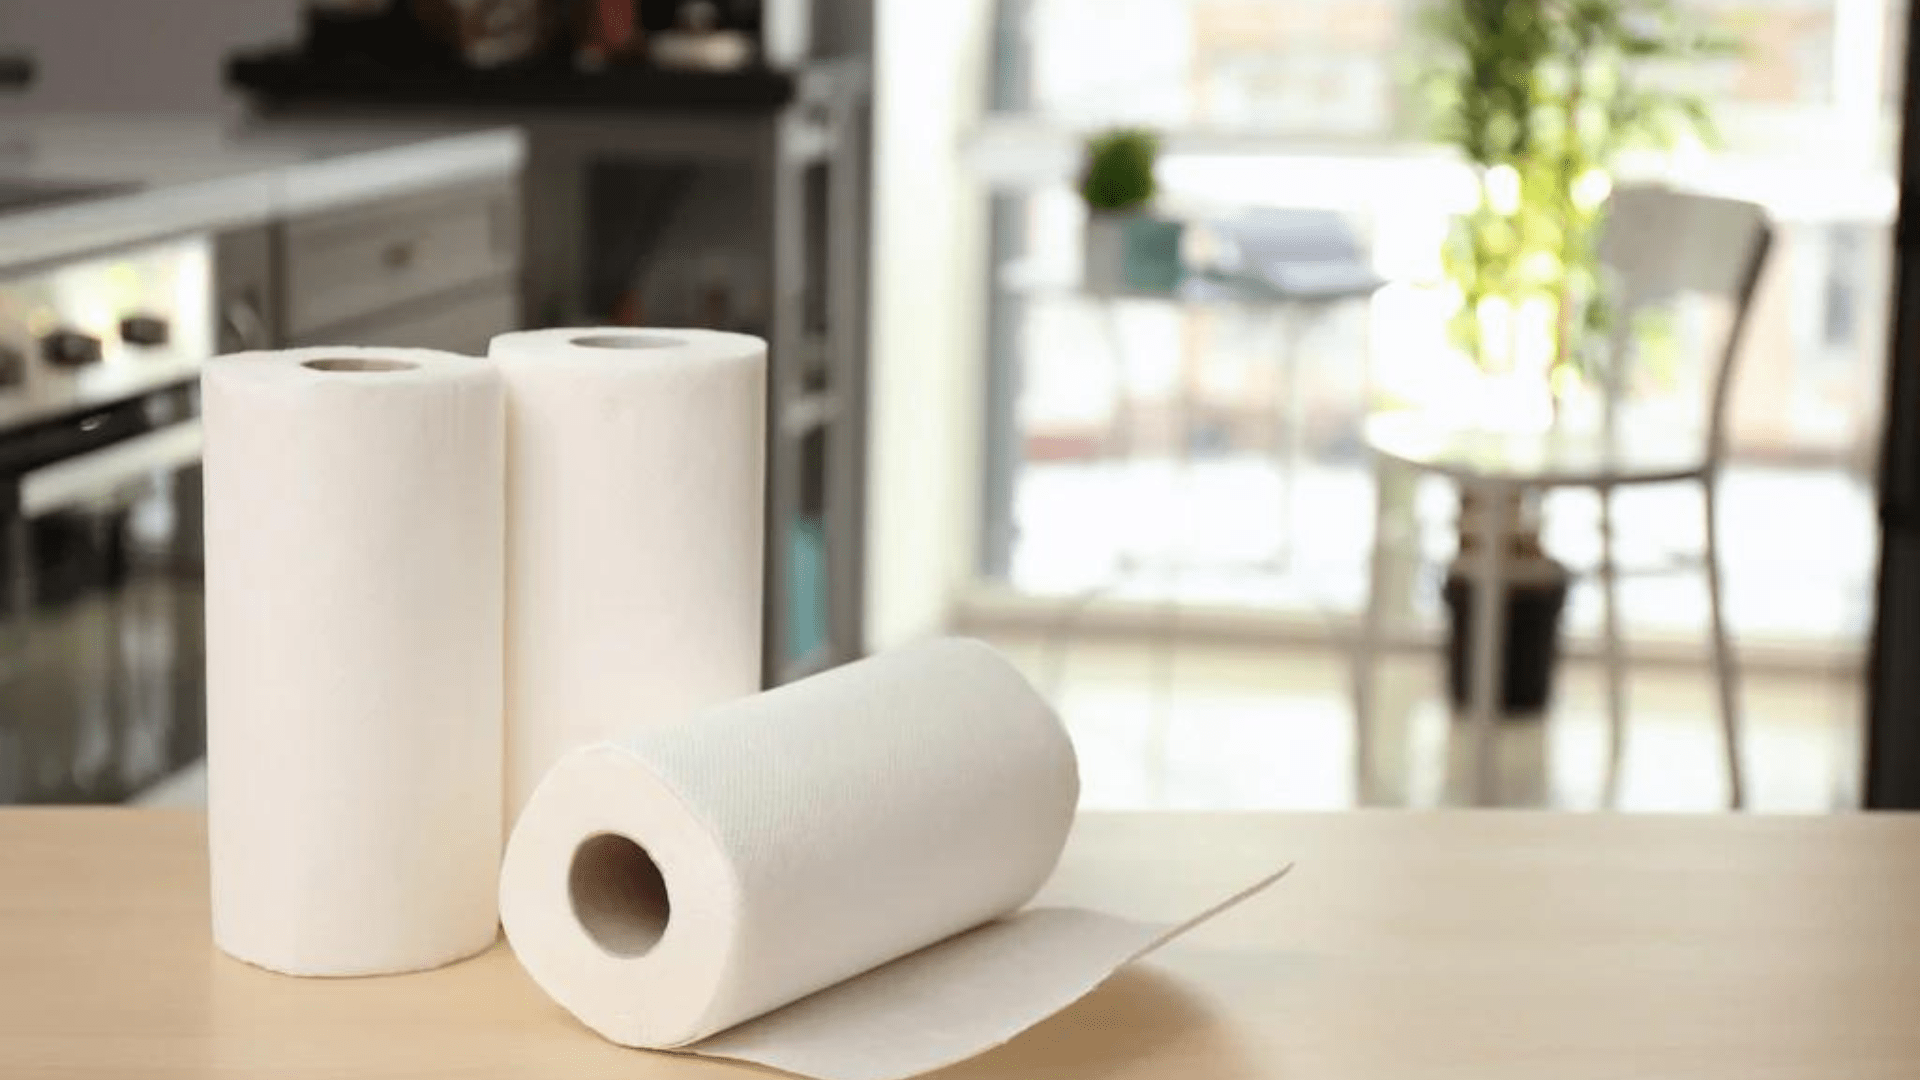 In a world increasingly conscious of environmental issues, the question of whether we can recycle paper towels looms large. As we navigate the realms of sustainability and eco-friendly living, understanding the recyclability of common household items becomes crucial.